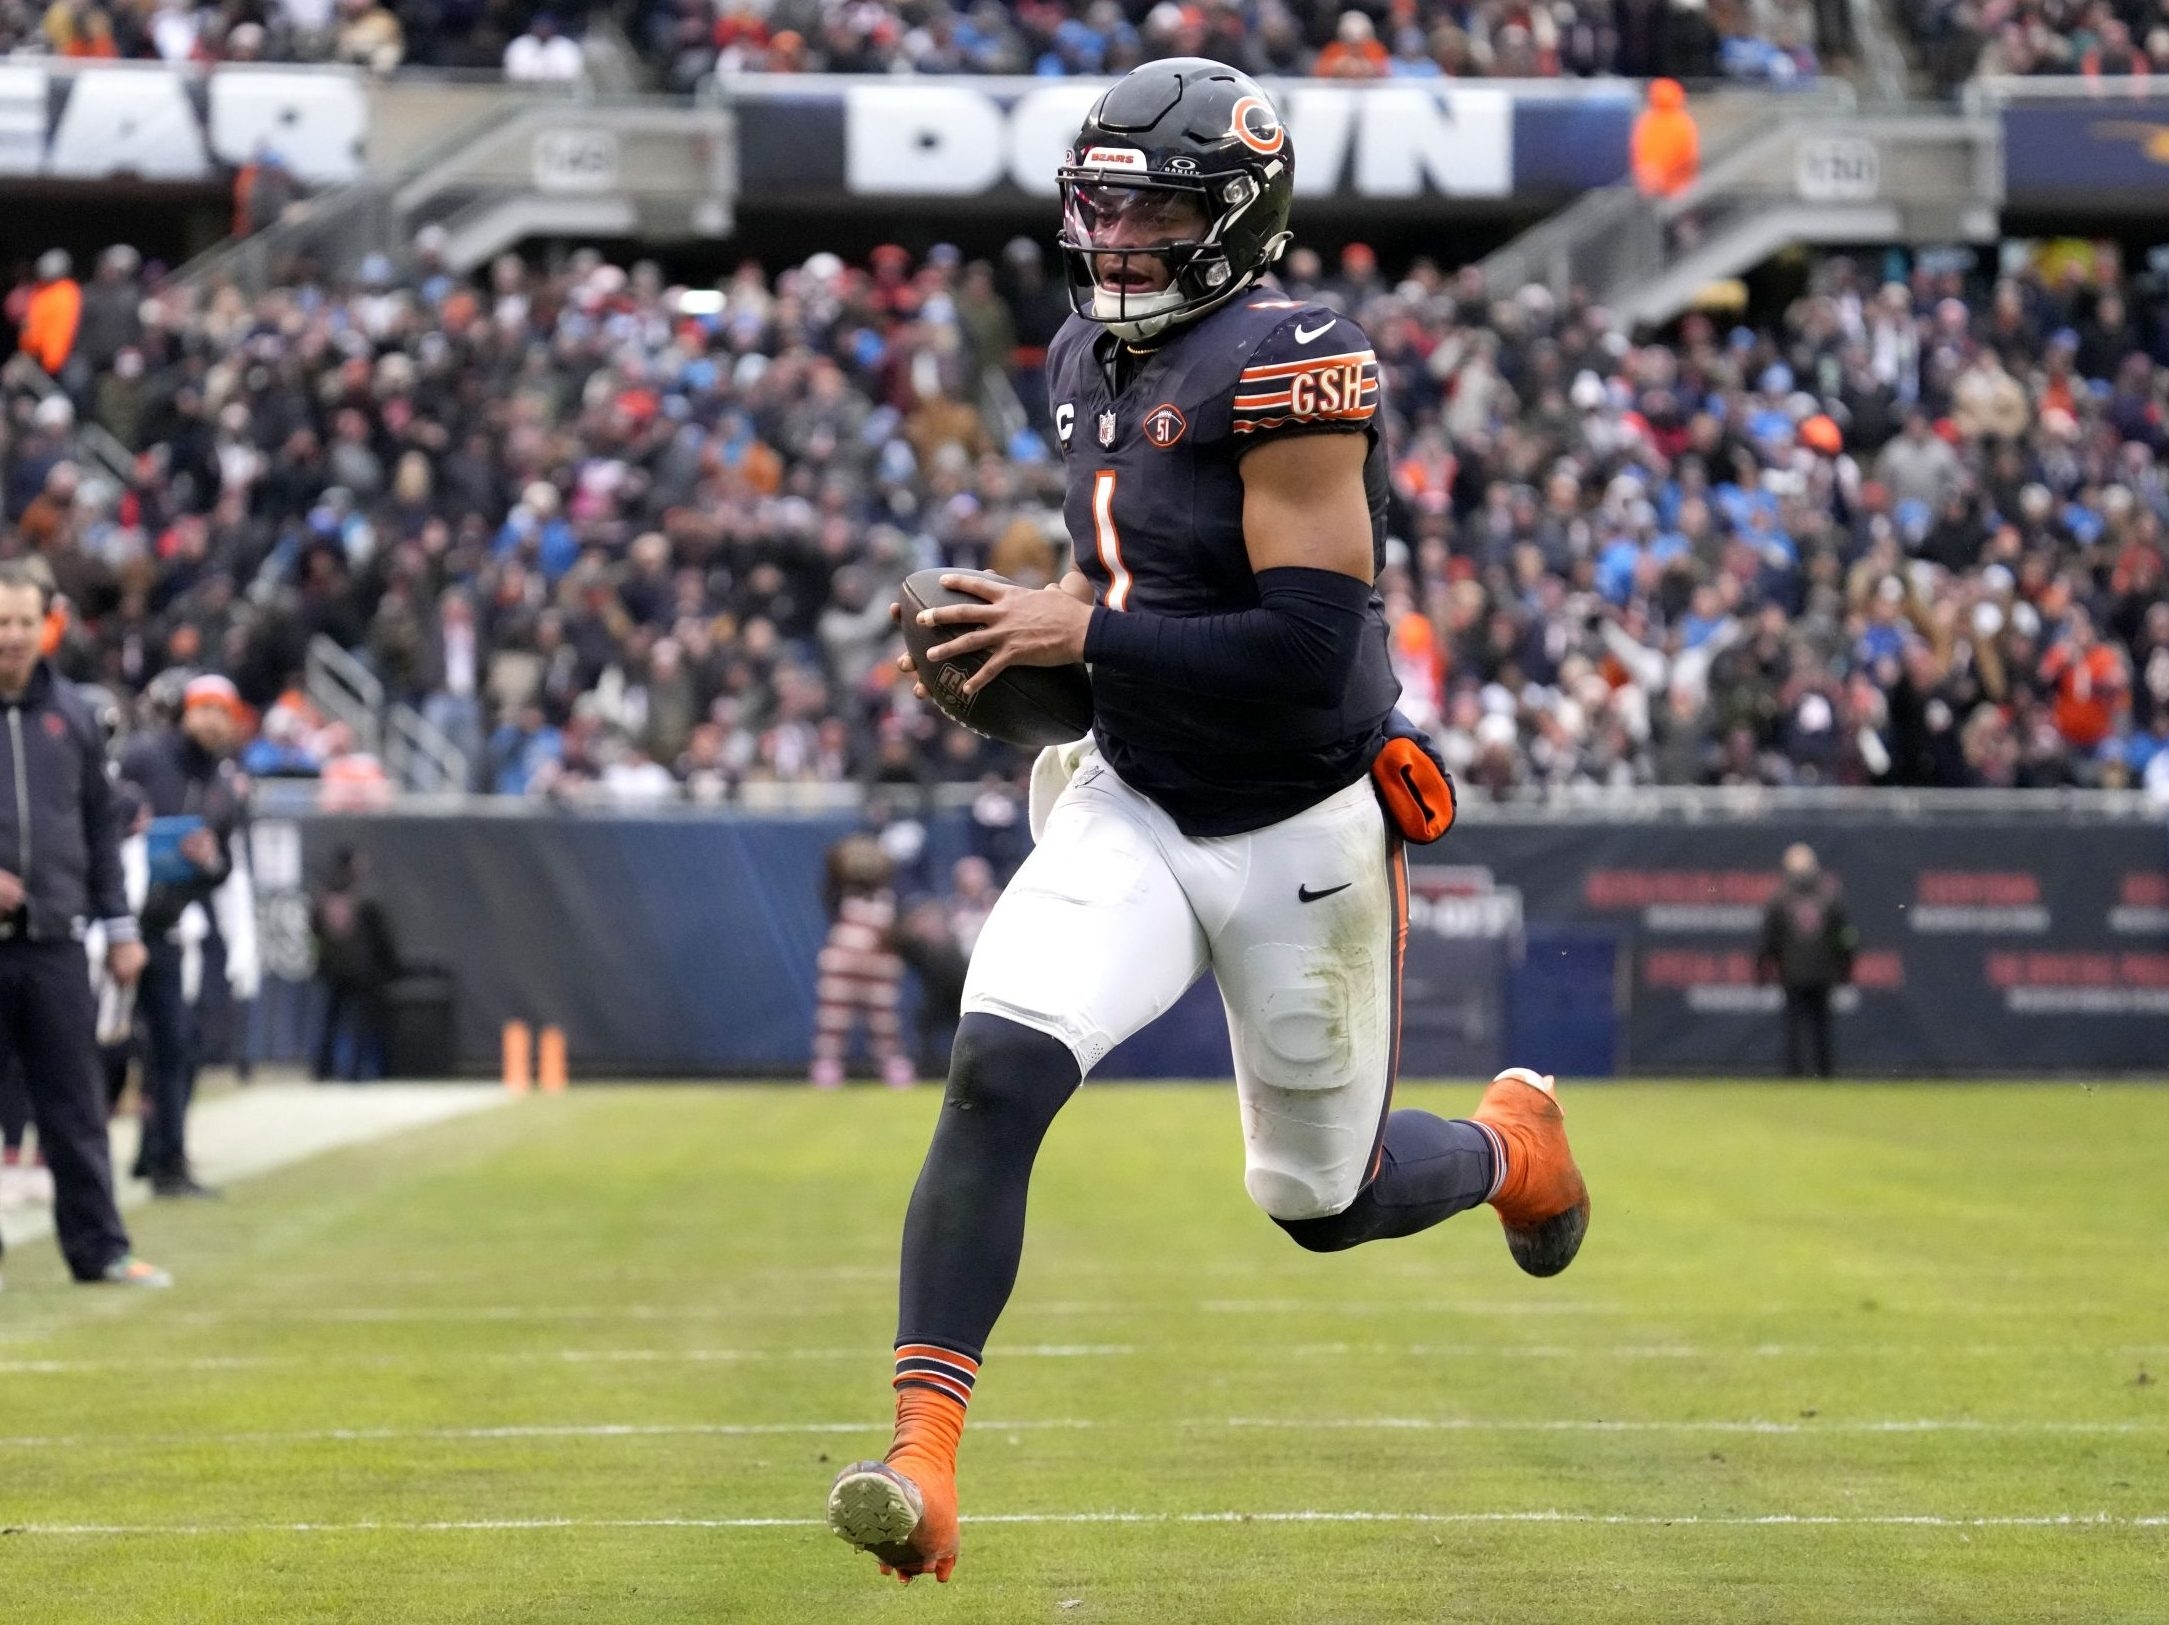 The Chicago Bears are the bleakest NFL team in memory this season.